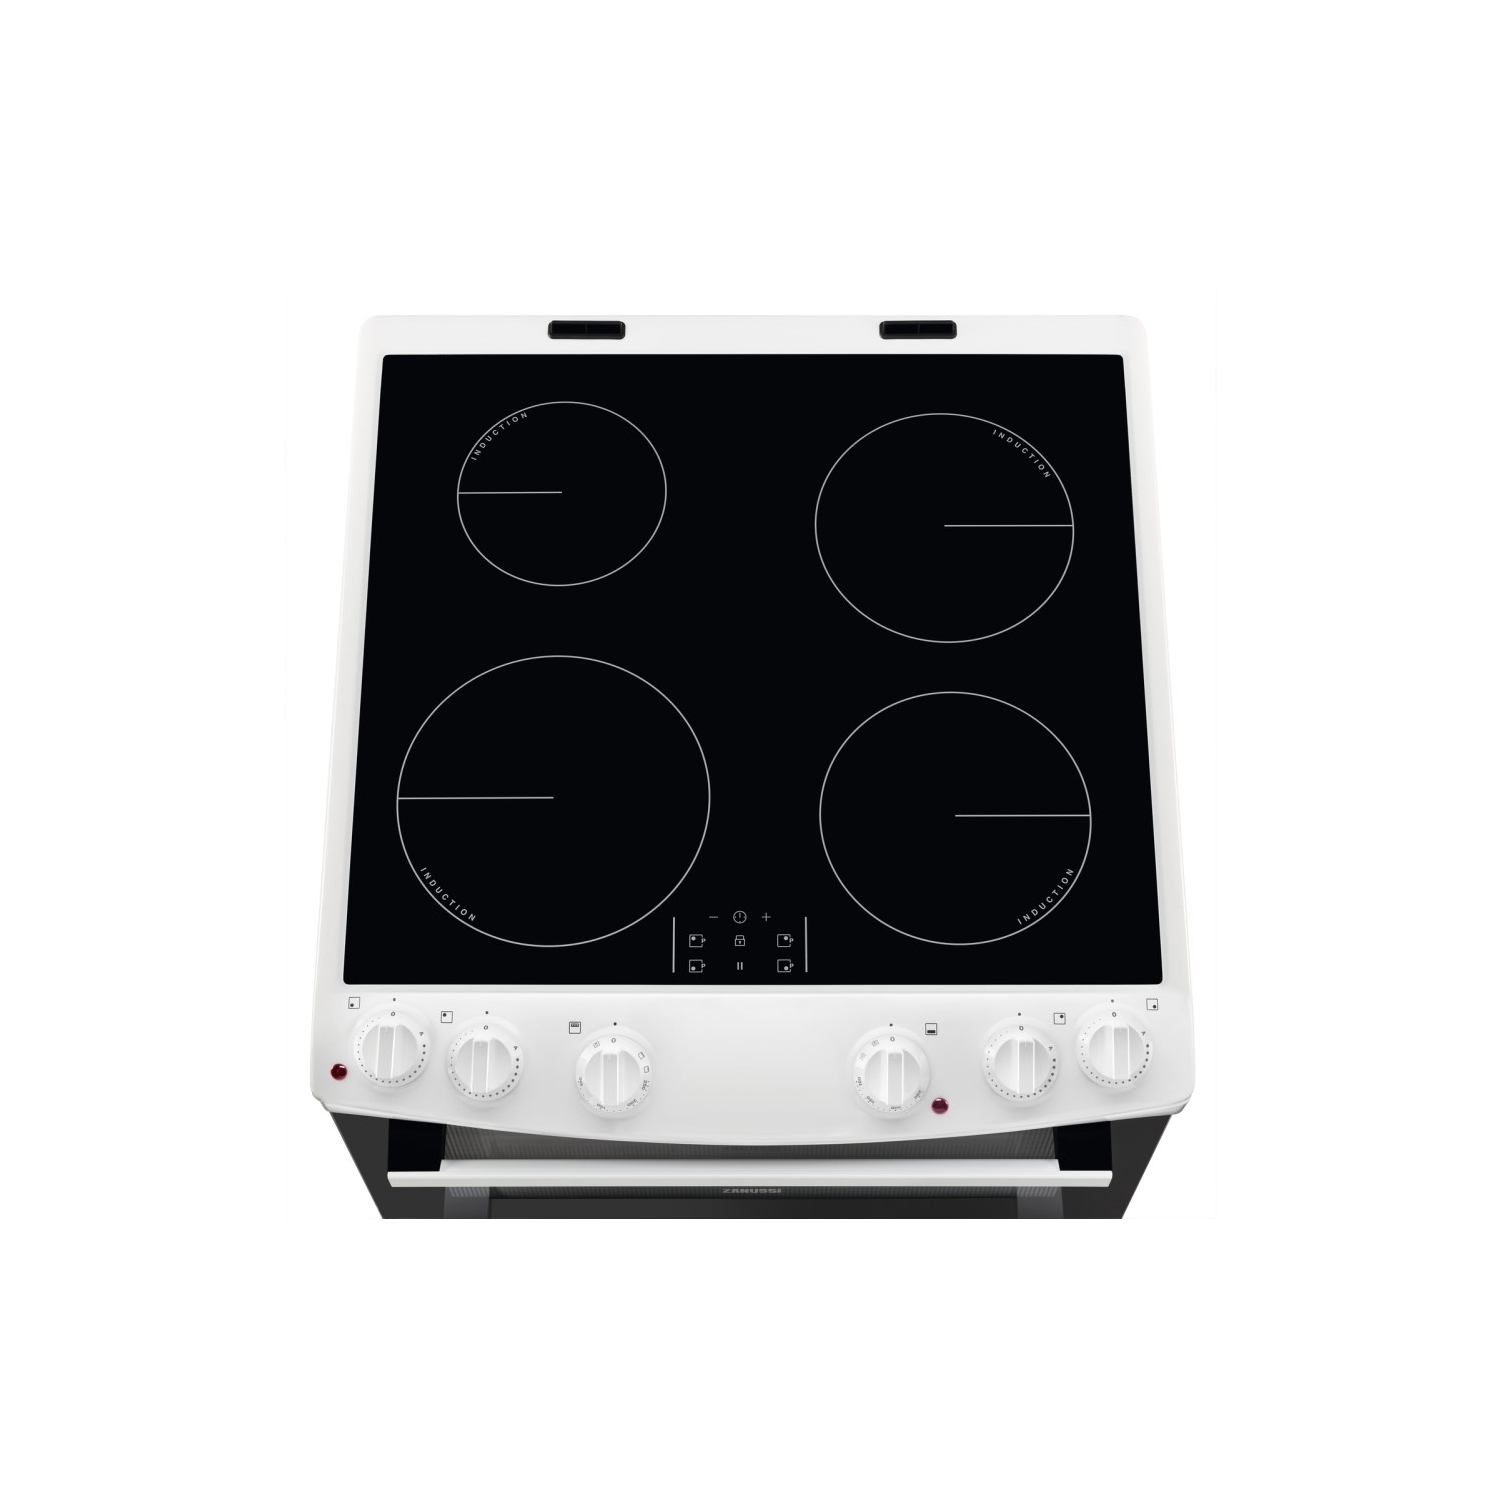 Zanussi ZCI66050WA 60cm Double Oven Electric Cooker With Induction Hob - 2